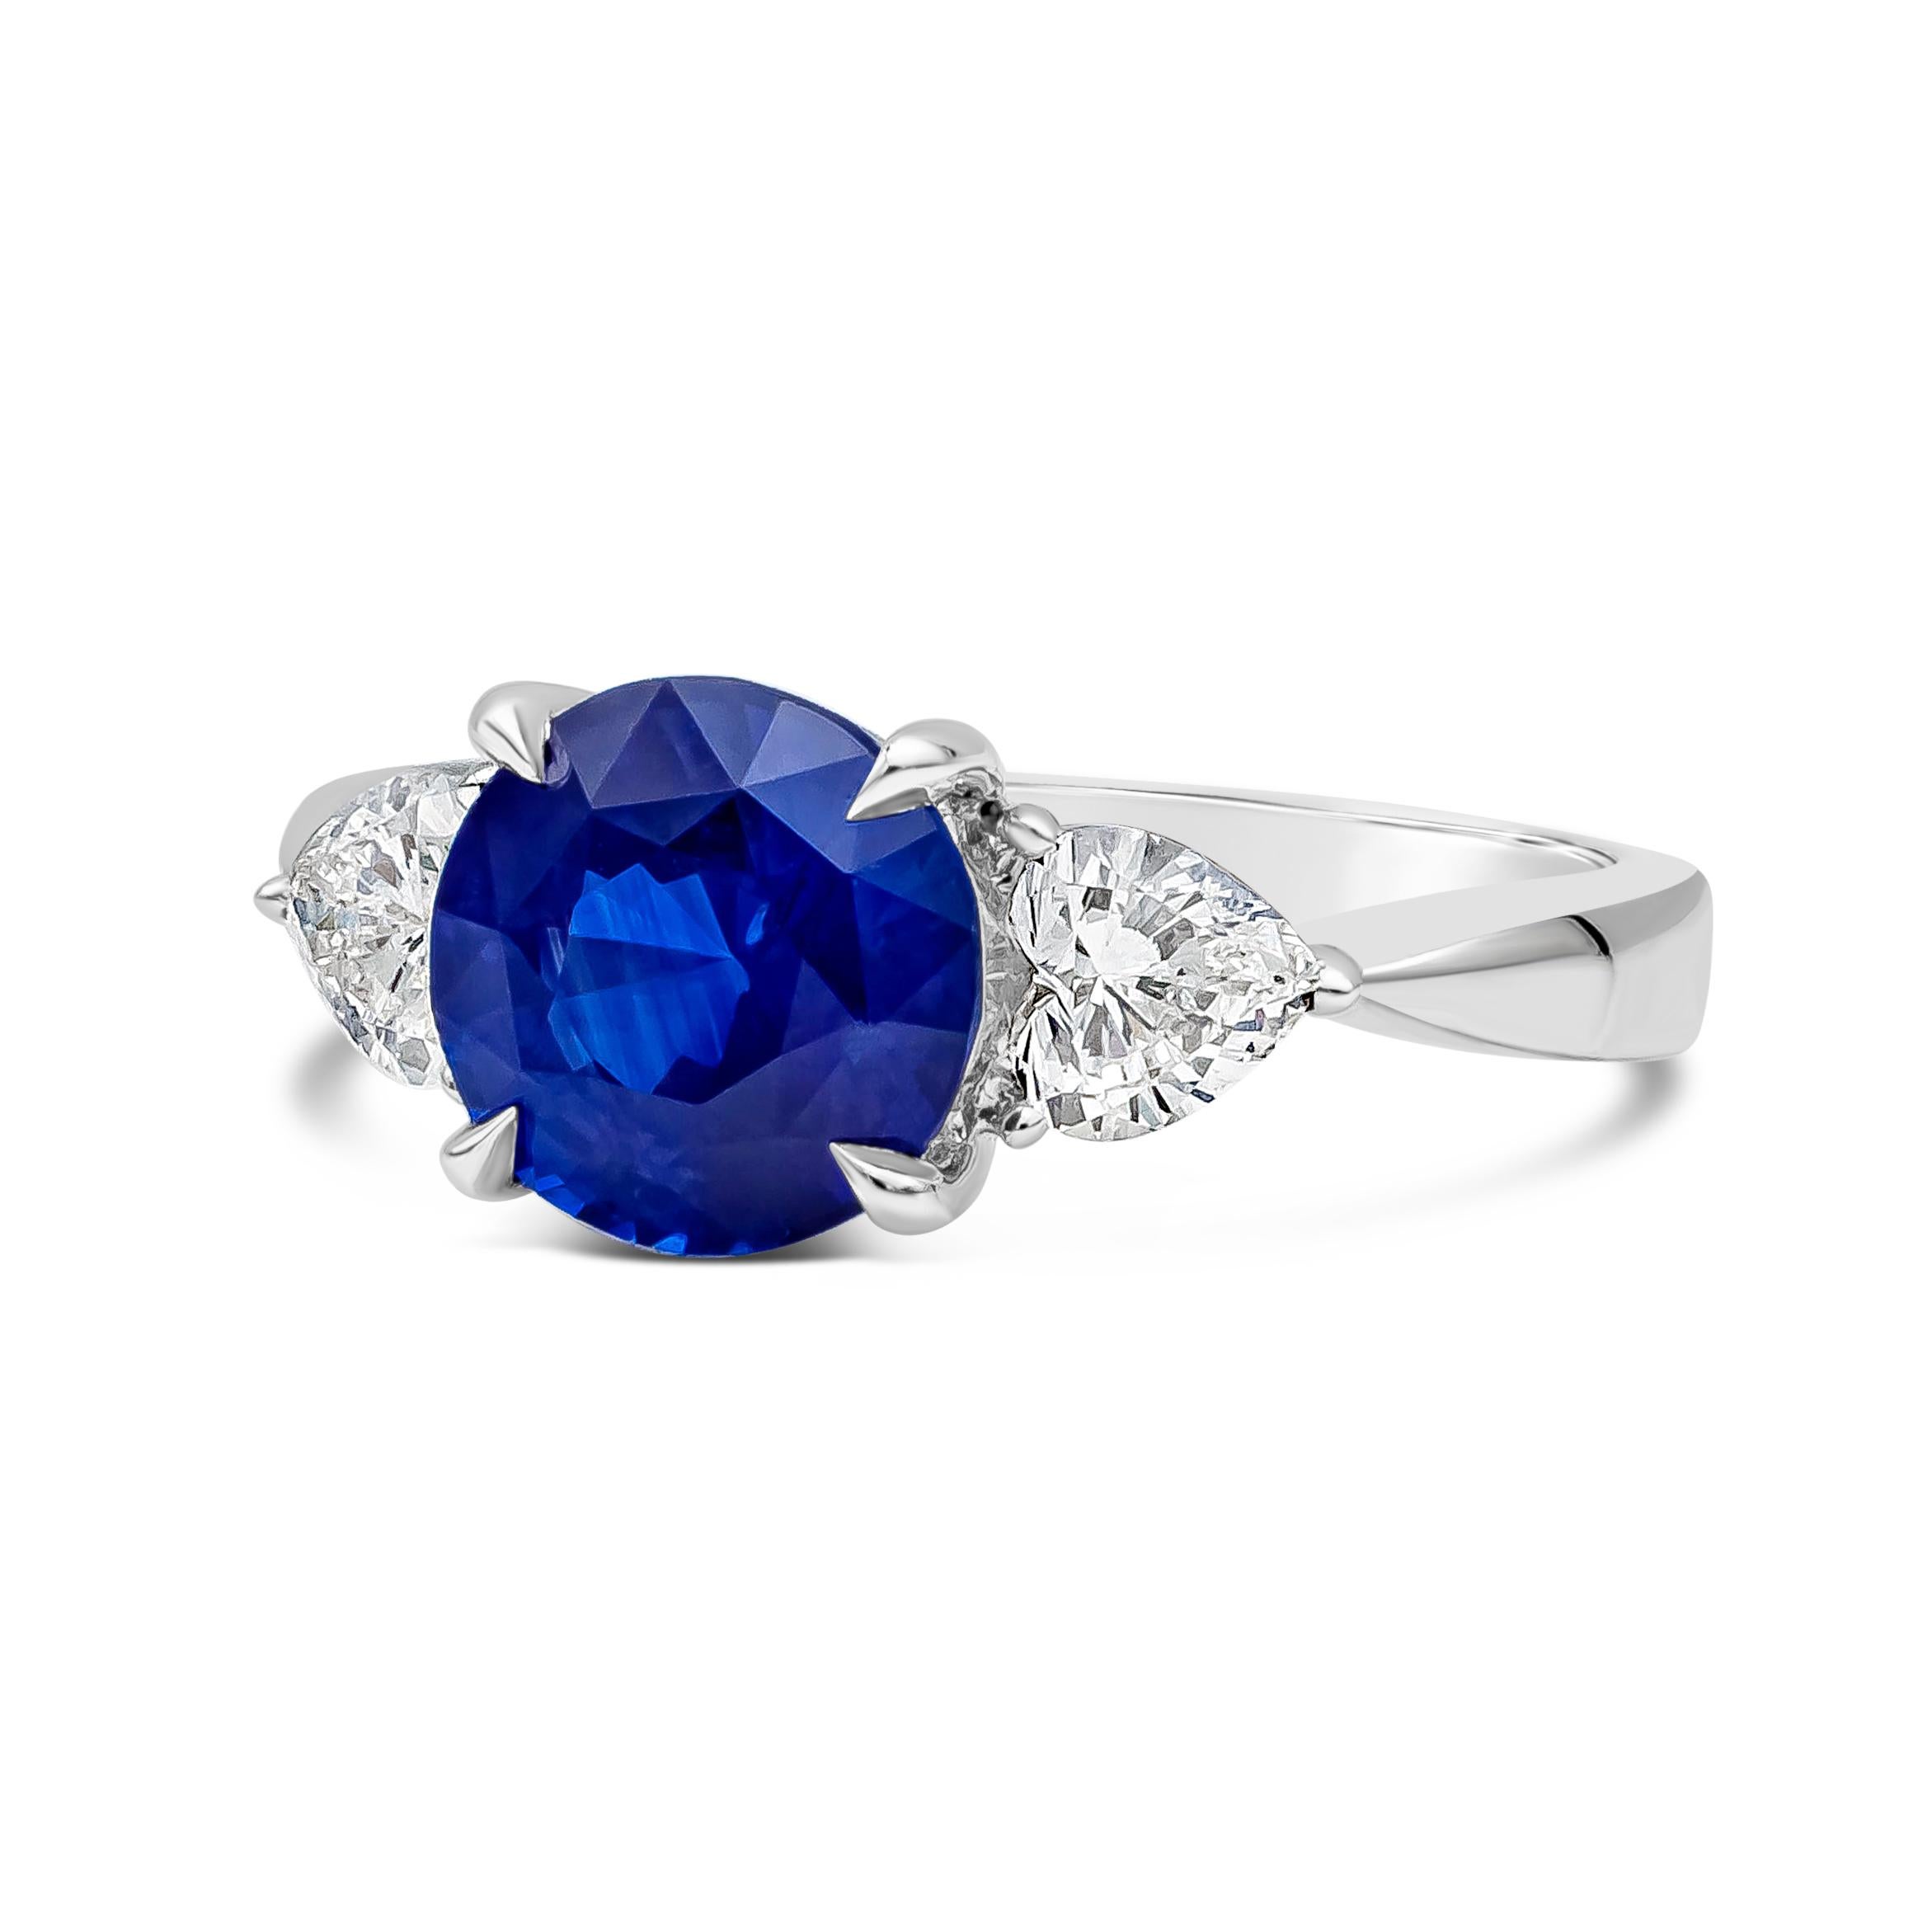 A classic but unique three-stone engagement ring showcasing a 2.77 carat round cut blue sapphire. Flanked by heart shape diamonds weighing 0.65 carats total. Set in a chic knife-edge, Made with Platinum. Size 6.5 US

Style available in different